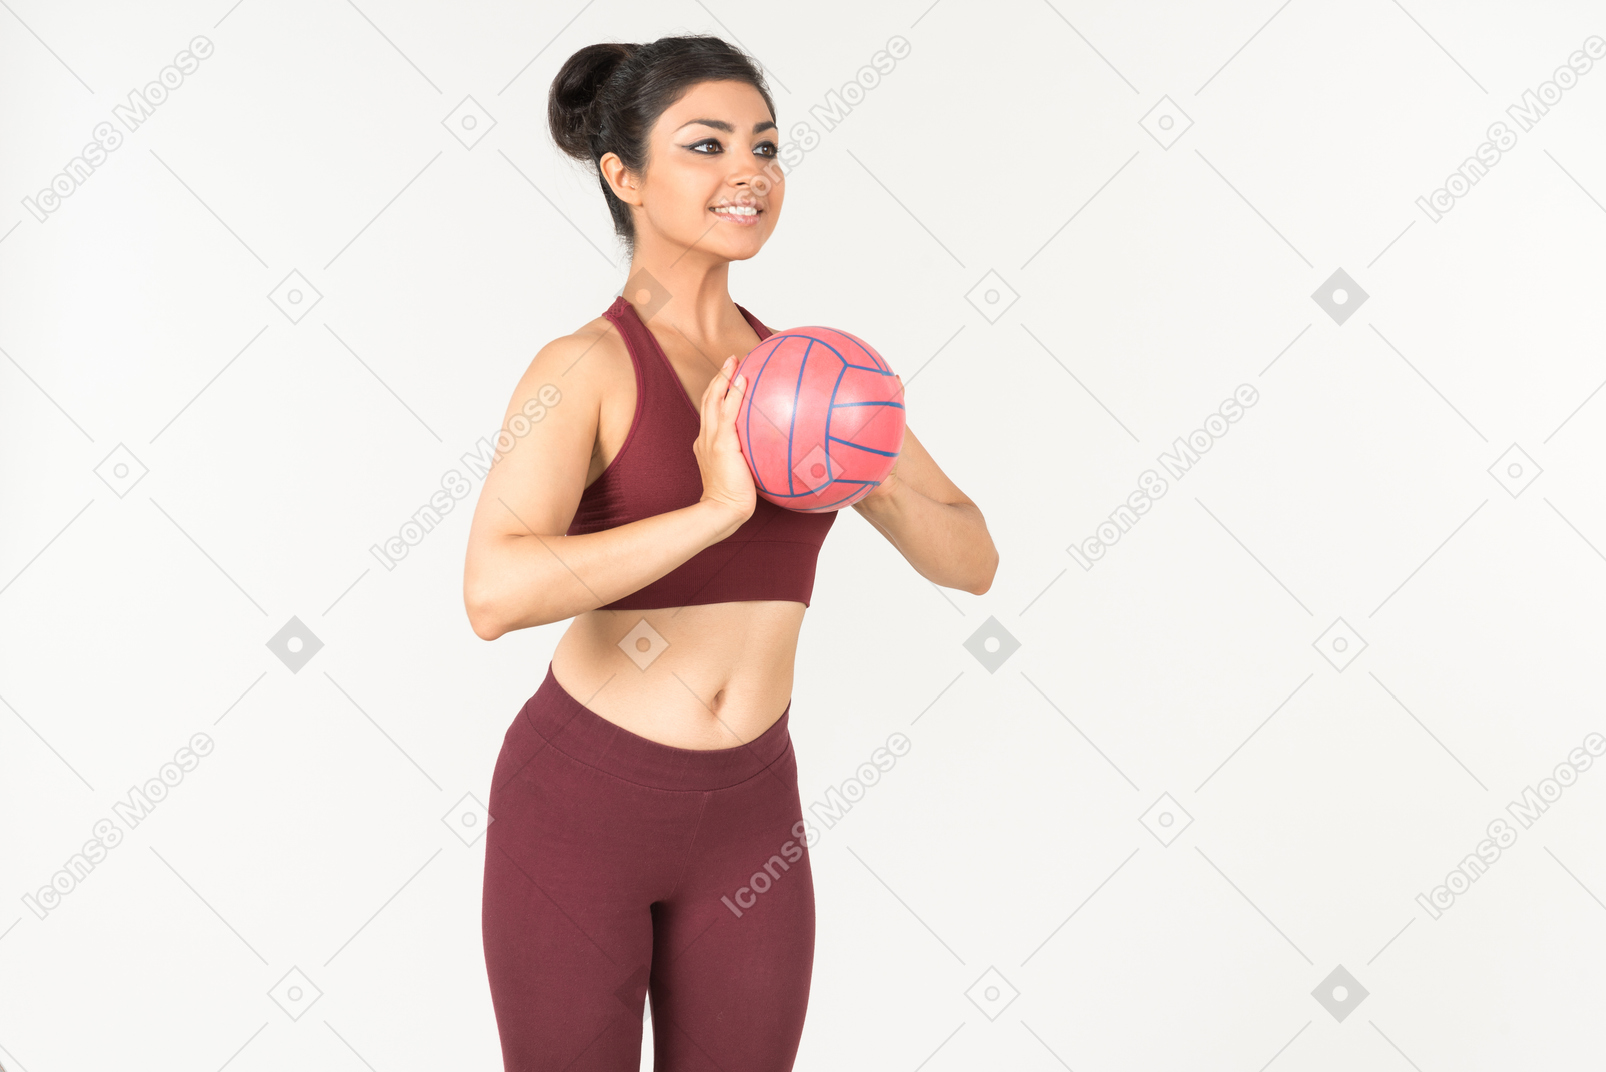 Young indian woman in sporstwear is going to throw a ball